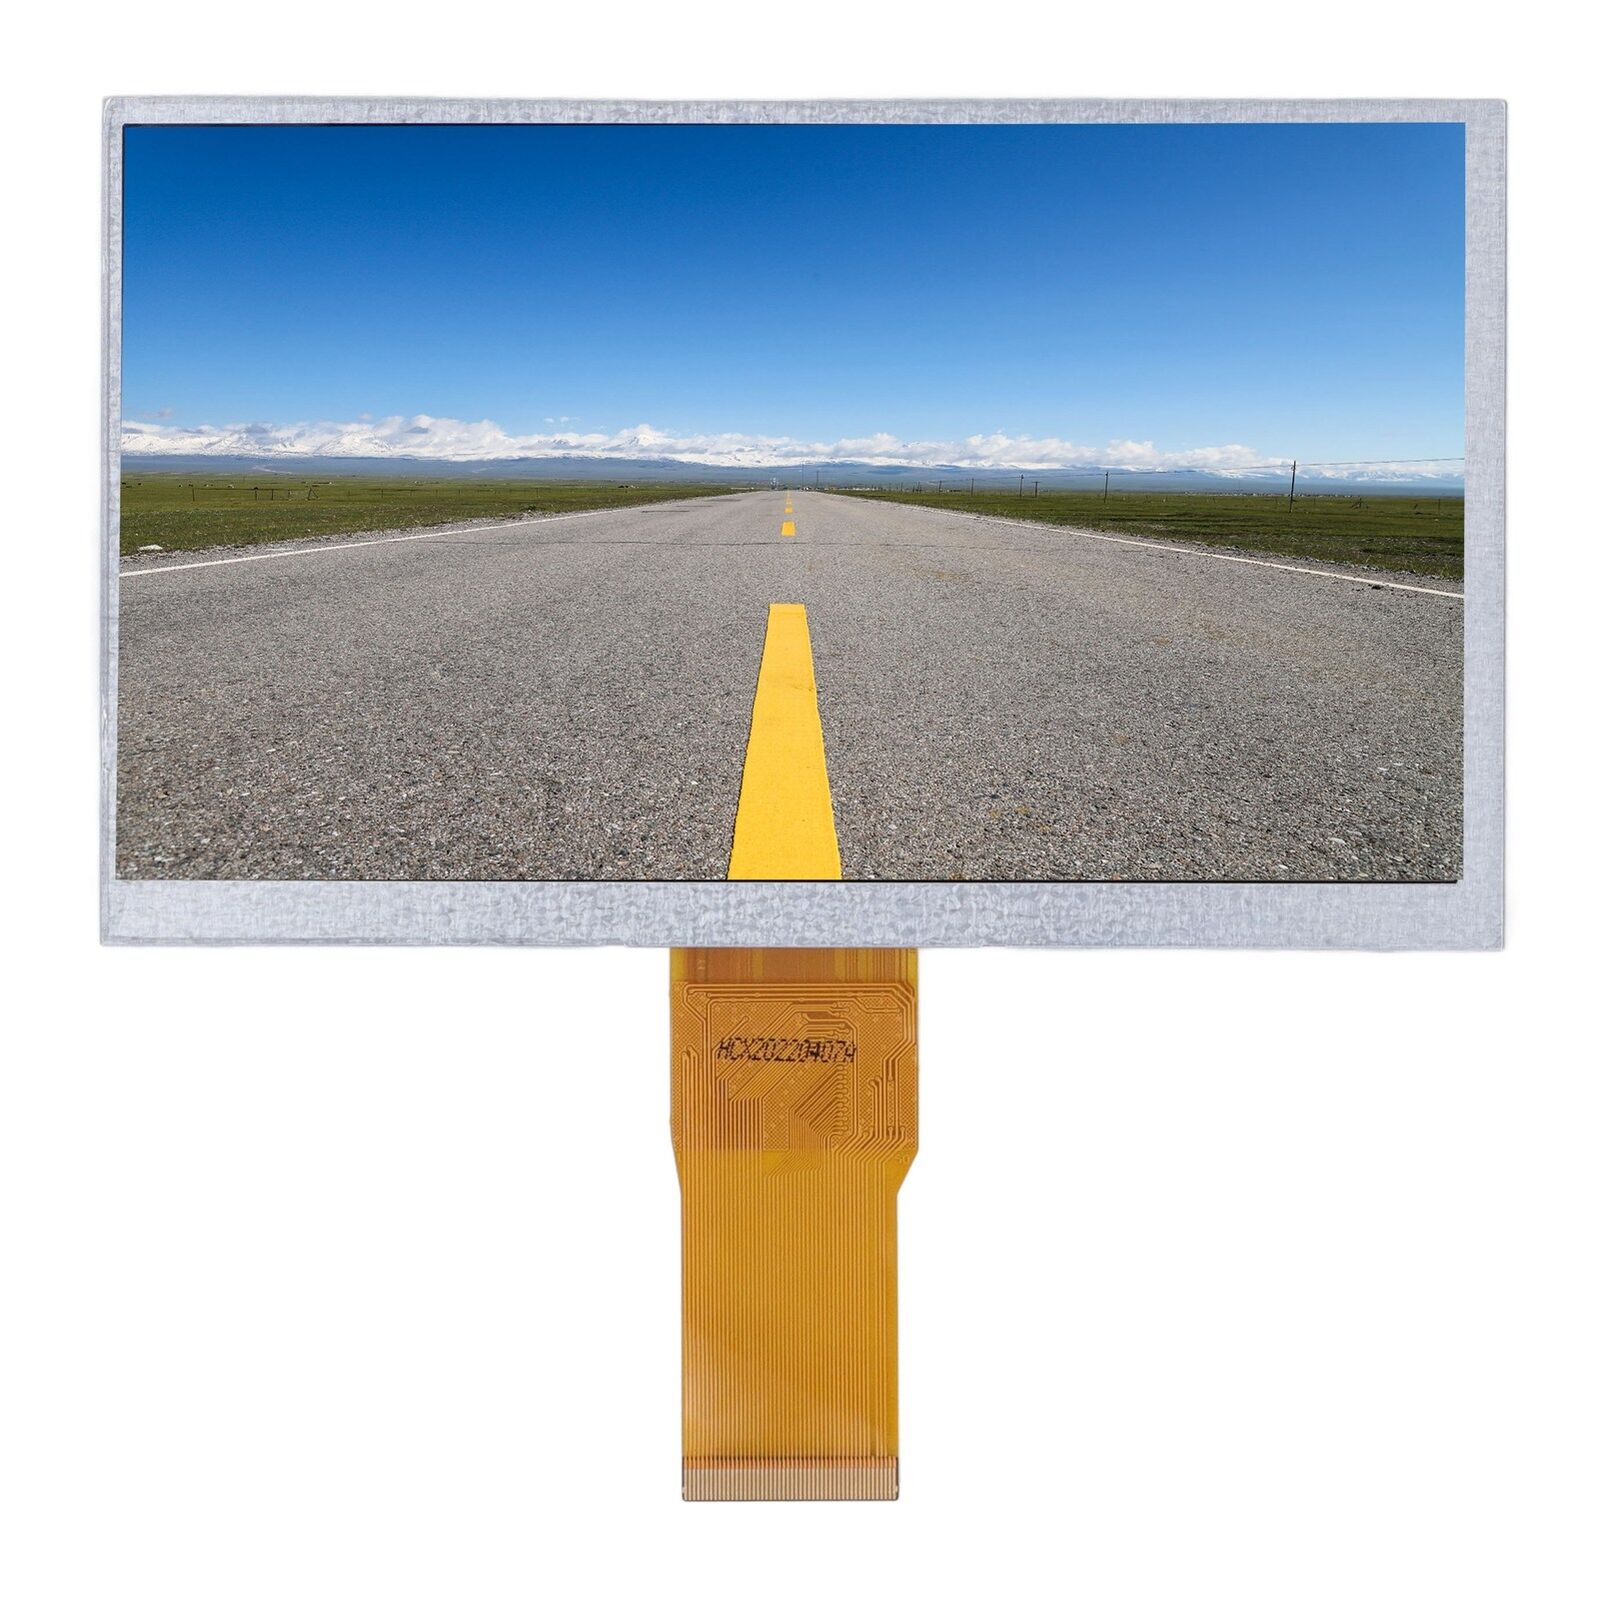 7 Inch IPS LCD Screen 1024x600 Resolution TFT High Definition LCD Display Module